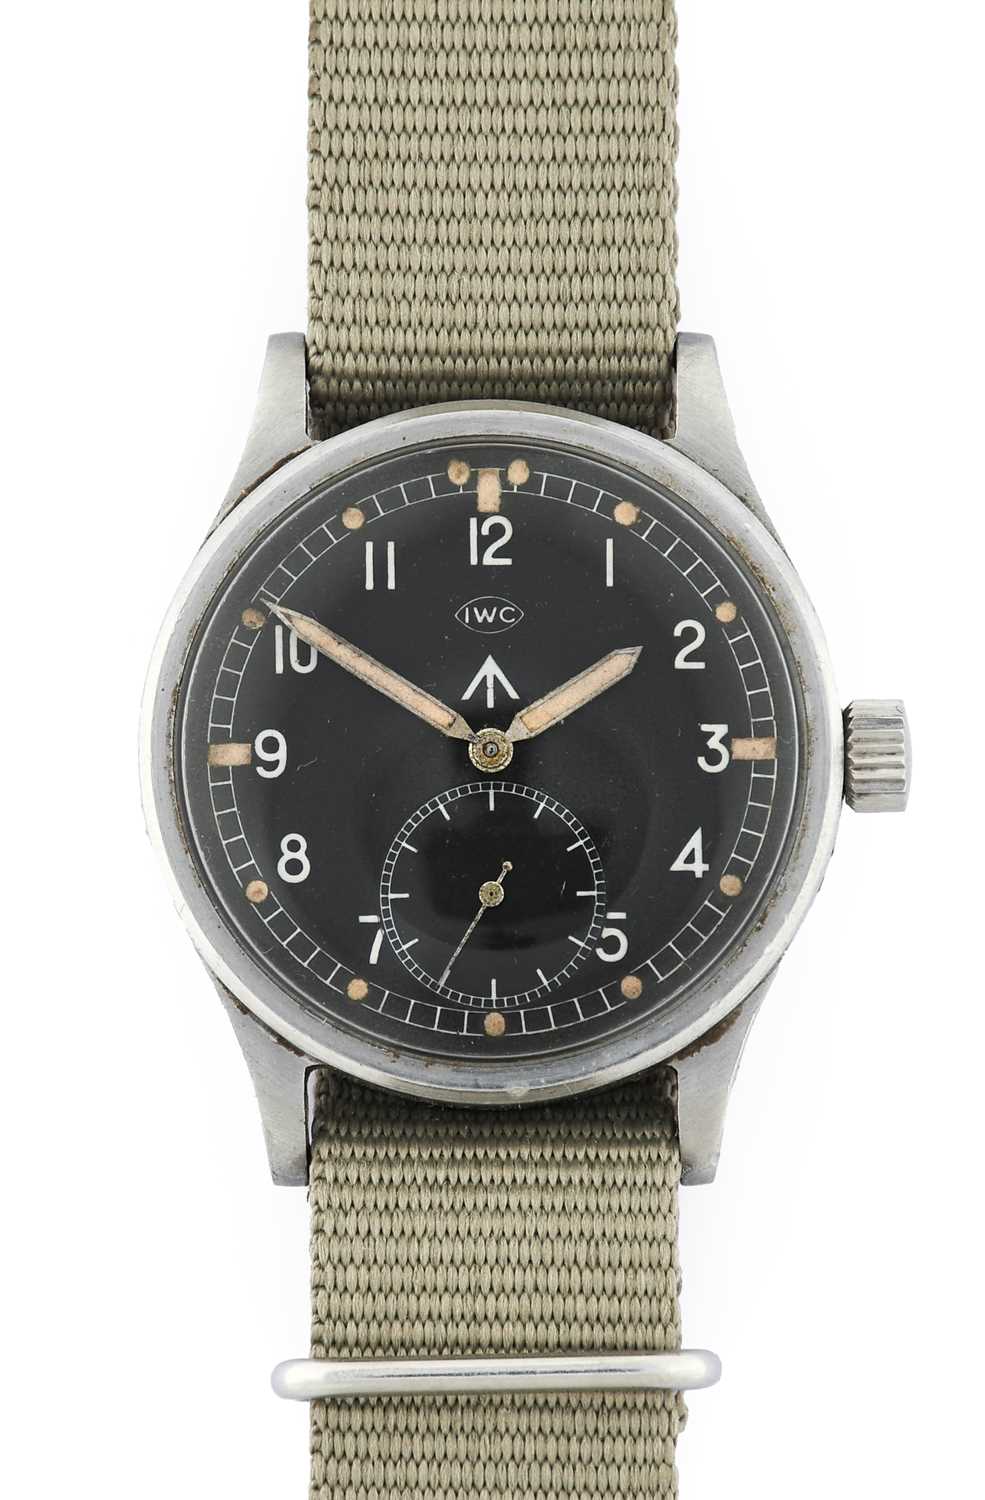 IWC: A Rare Stainless Steel Military Issue Wristwatch, signed IWC, model: Mark X, so called by